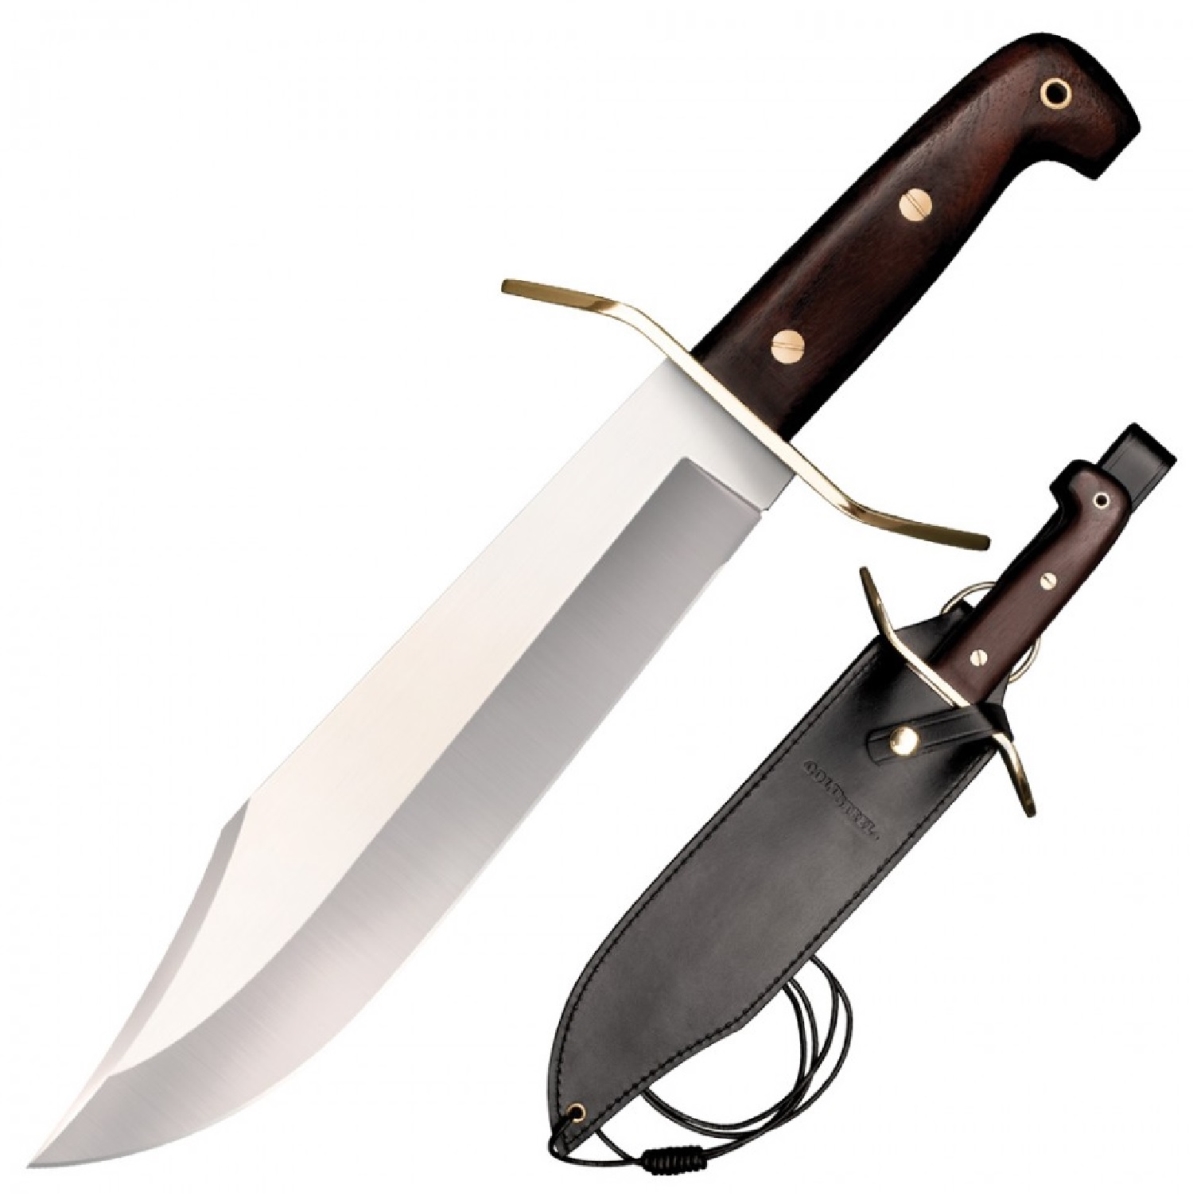 MakeITHappen 10.75 in. Wild West Bowie Fixed Blade with Wood Handle